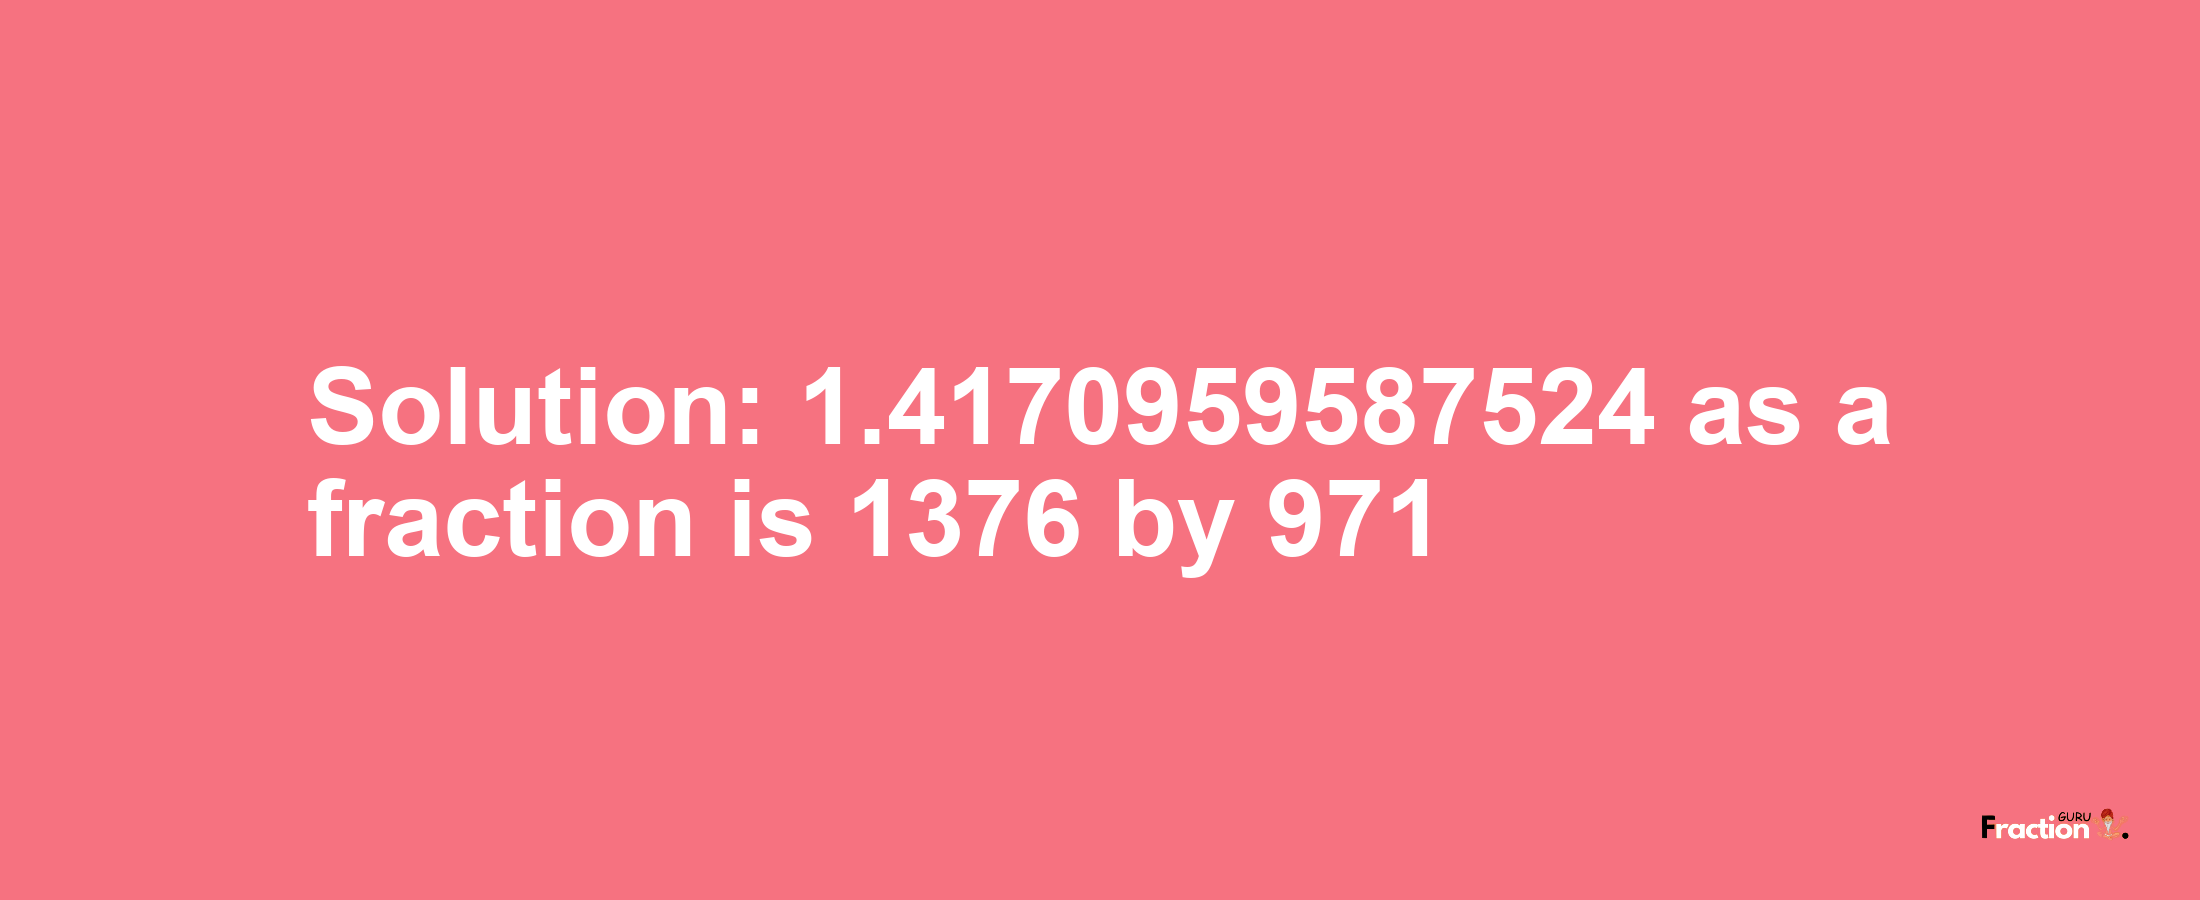 Solution:1.4170959587524 as a fraction is 1376/971